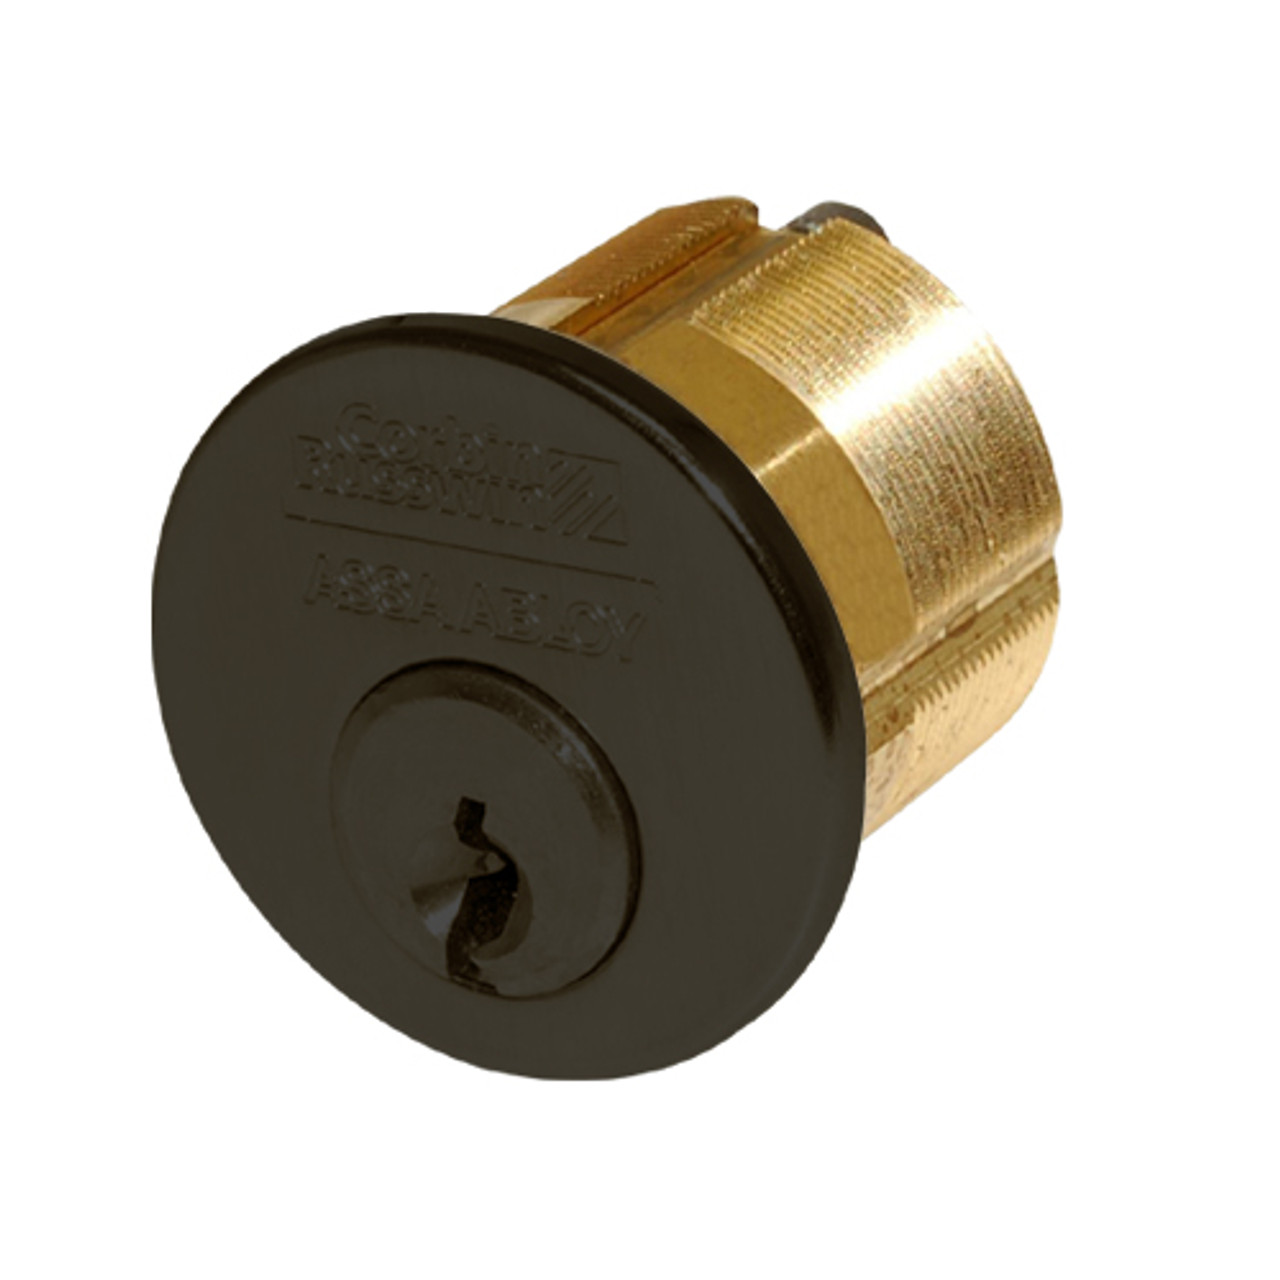 CR1000-200-A02-6-D3-613 Corbin Conventional Mortise Cylinder for Mortise Lock and DL3000 Deadlocks with Straight Cam in Oil Rubbed Bronze Finish